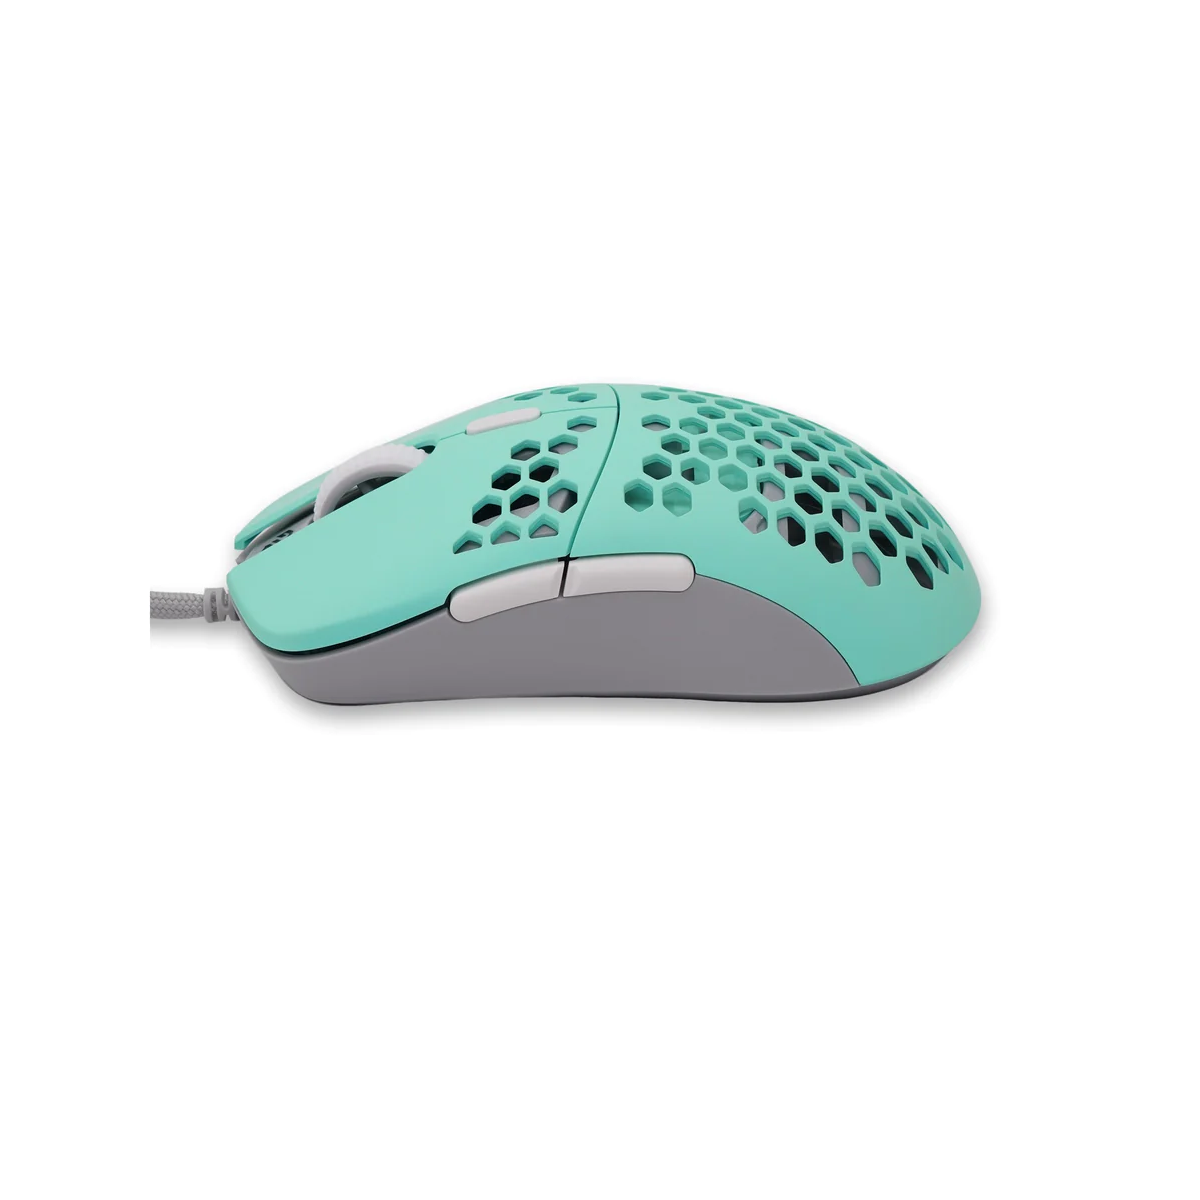 Hati HTM Classic Wired Gaming Mouse